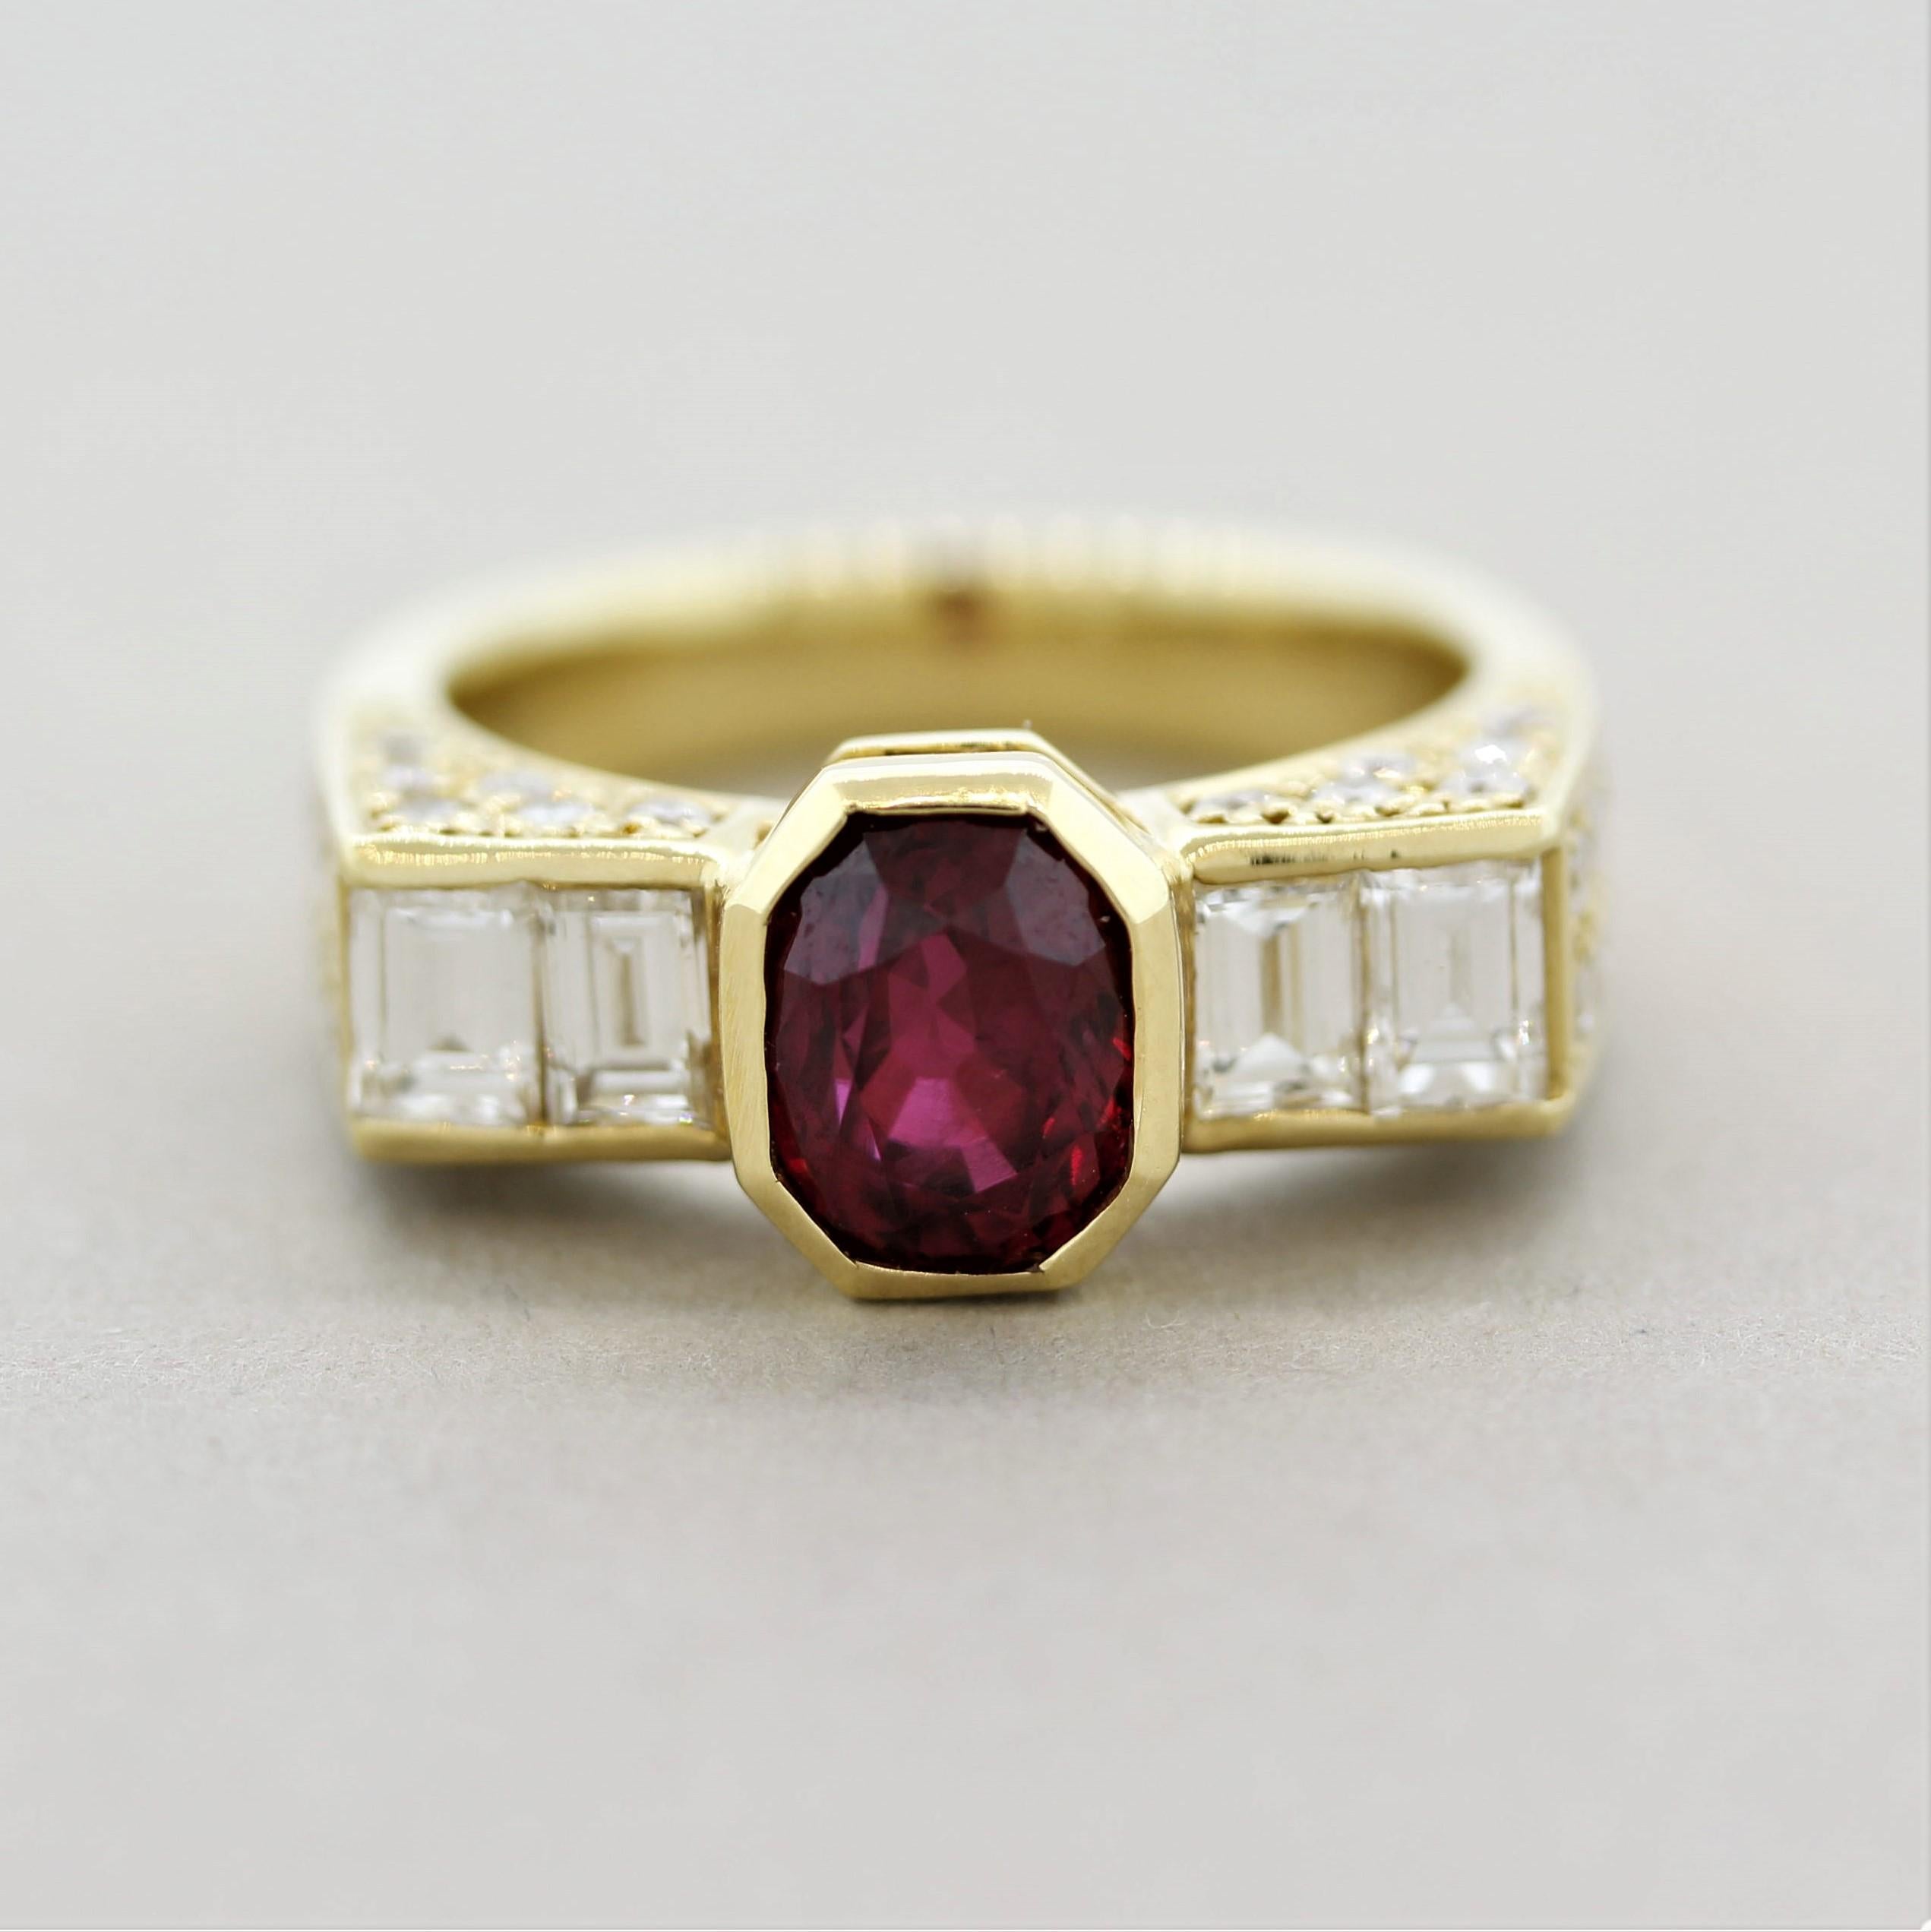 A superb gem quality 2.10 carat ruby takes center stage! The oval-shaped gem is unheated with no treatments and has a vivid red color with excellent brilliance. It is accented by 1.52 carats of round brilliant-cut diamonds as well as 4 larger